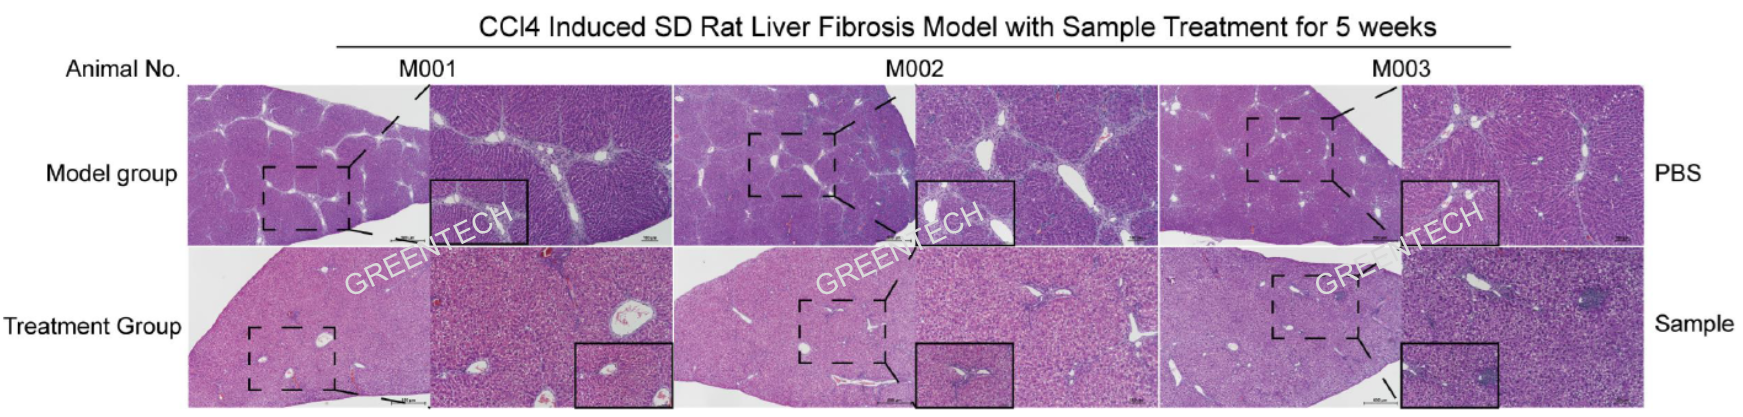 Liver histopathology of liver fibrosis model induced by CCl4 injection for 6 weeks.png